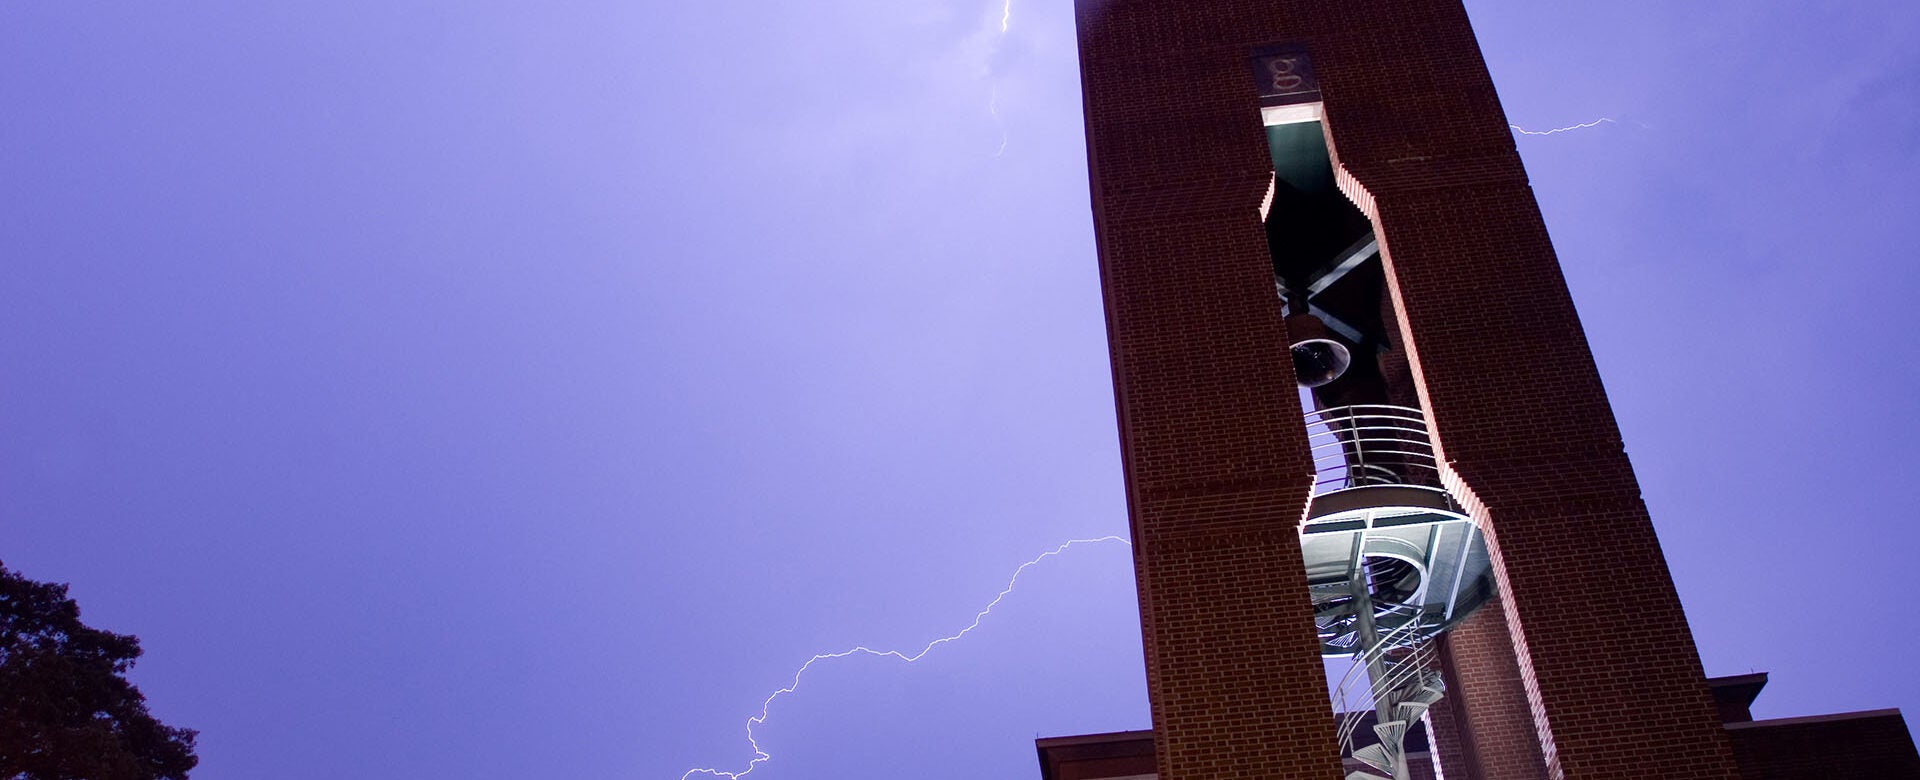 image of the CSHL Hazen Tower with lightning bolts in the background sky